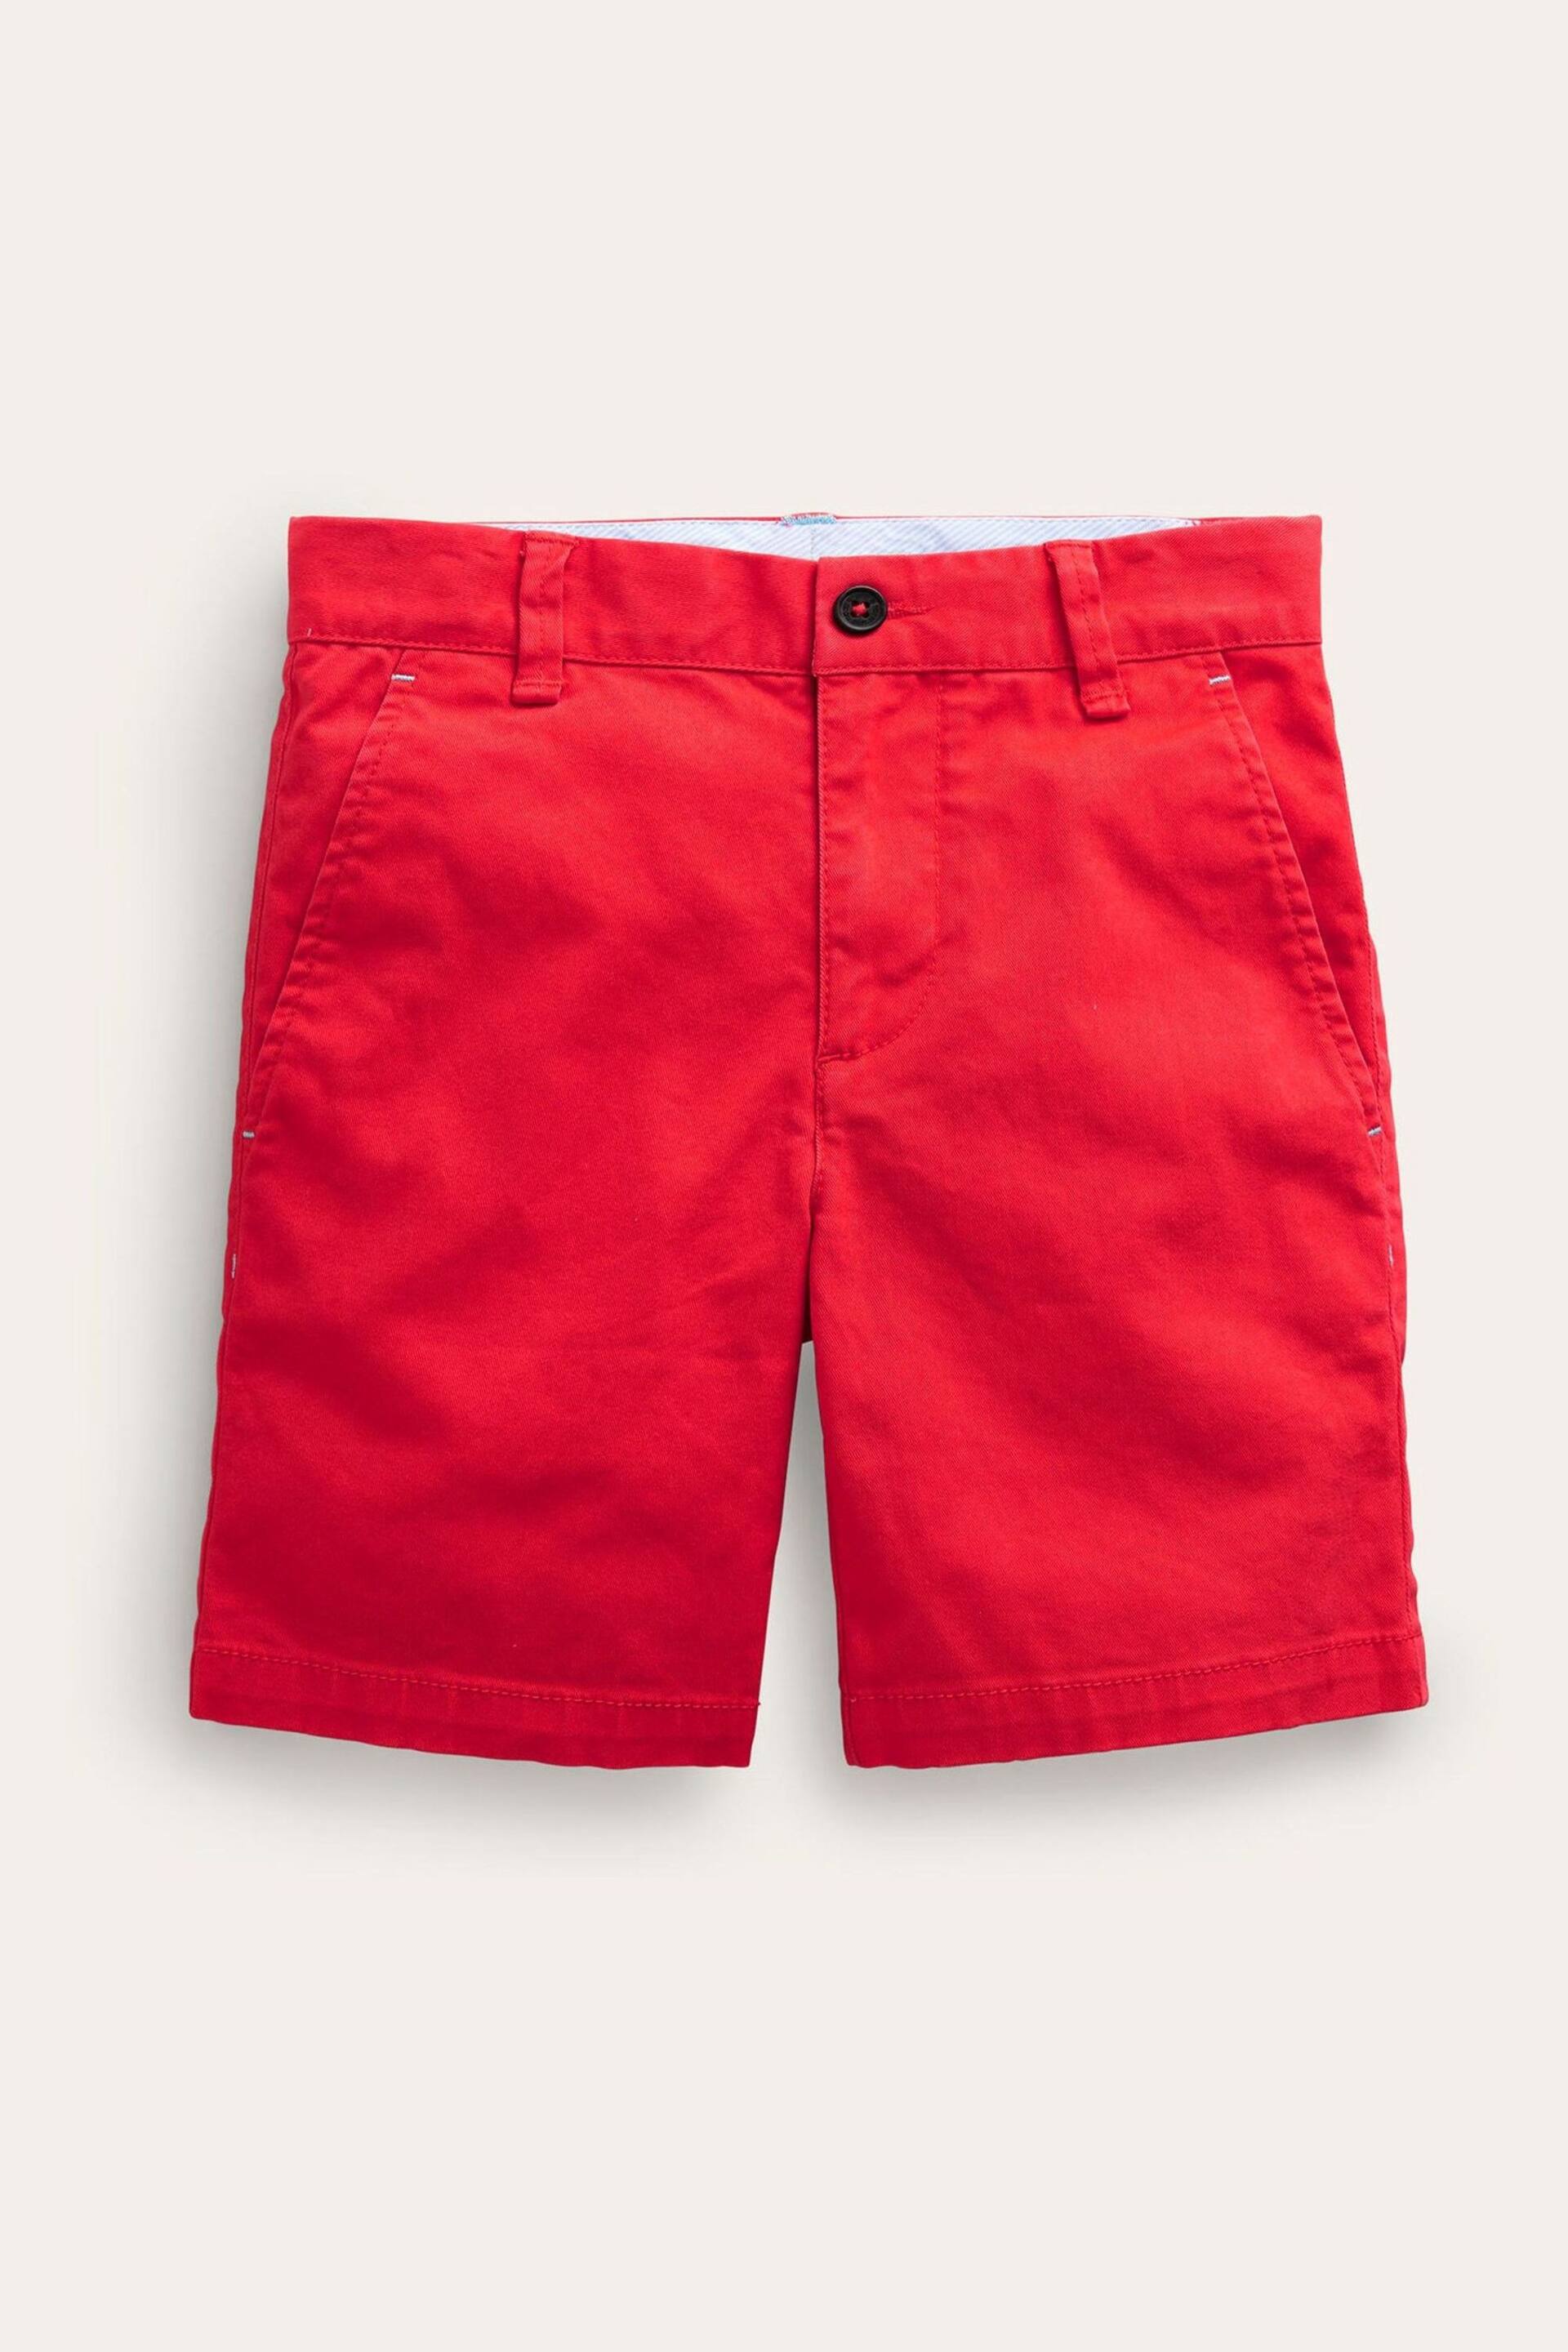 Boden Red Classic Chino Shorts - Image 1 of 3